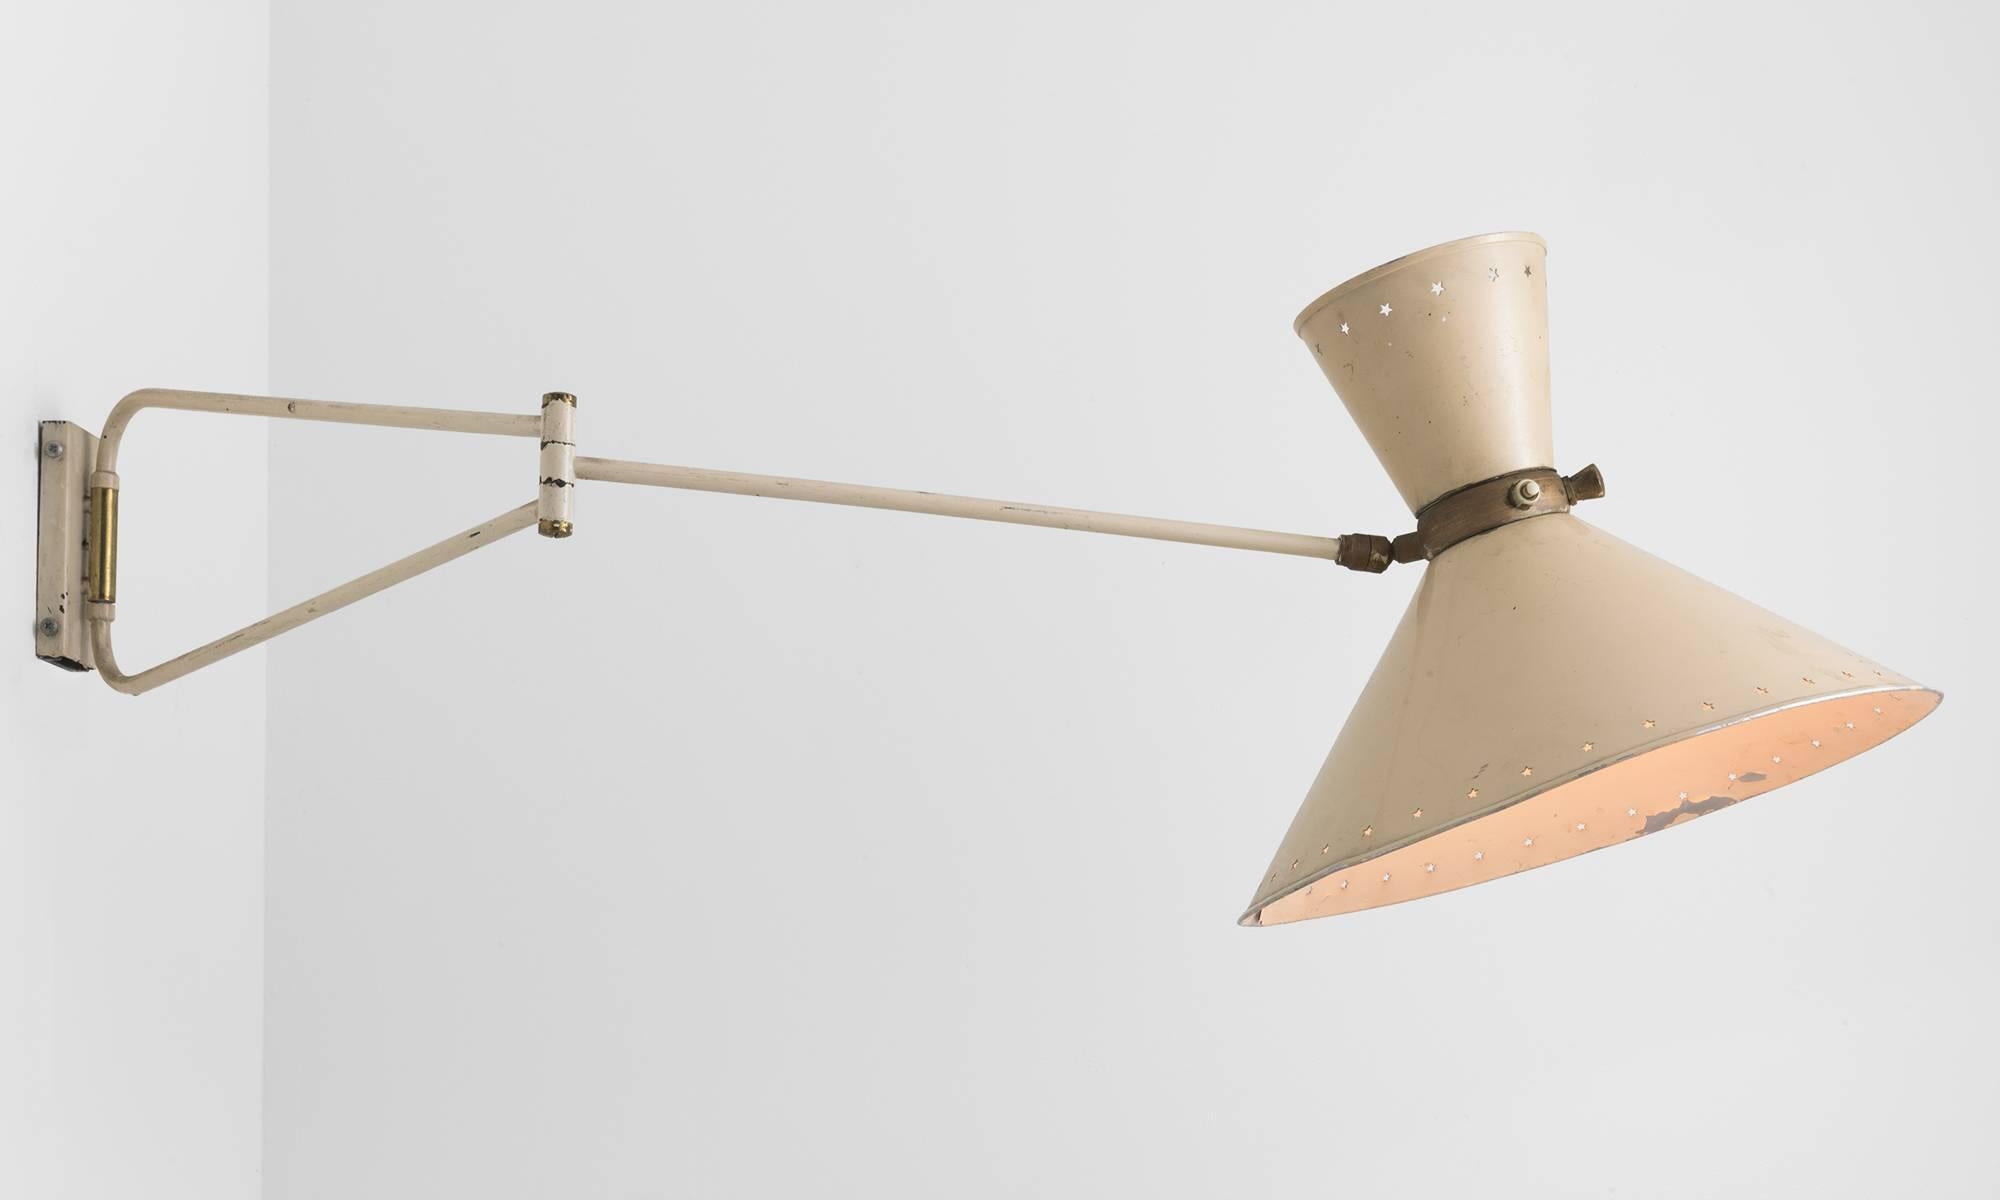 Modern swing arm wall sconce by Rene Mathieu, circa 1950.

Designed by Rene Mathieu for Lunel, France, circa 1950. Double cone lampshade with star-shaped perforation, original cream colored paint and brass details.
